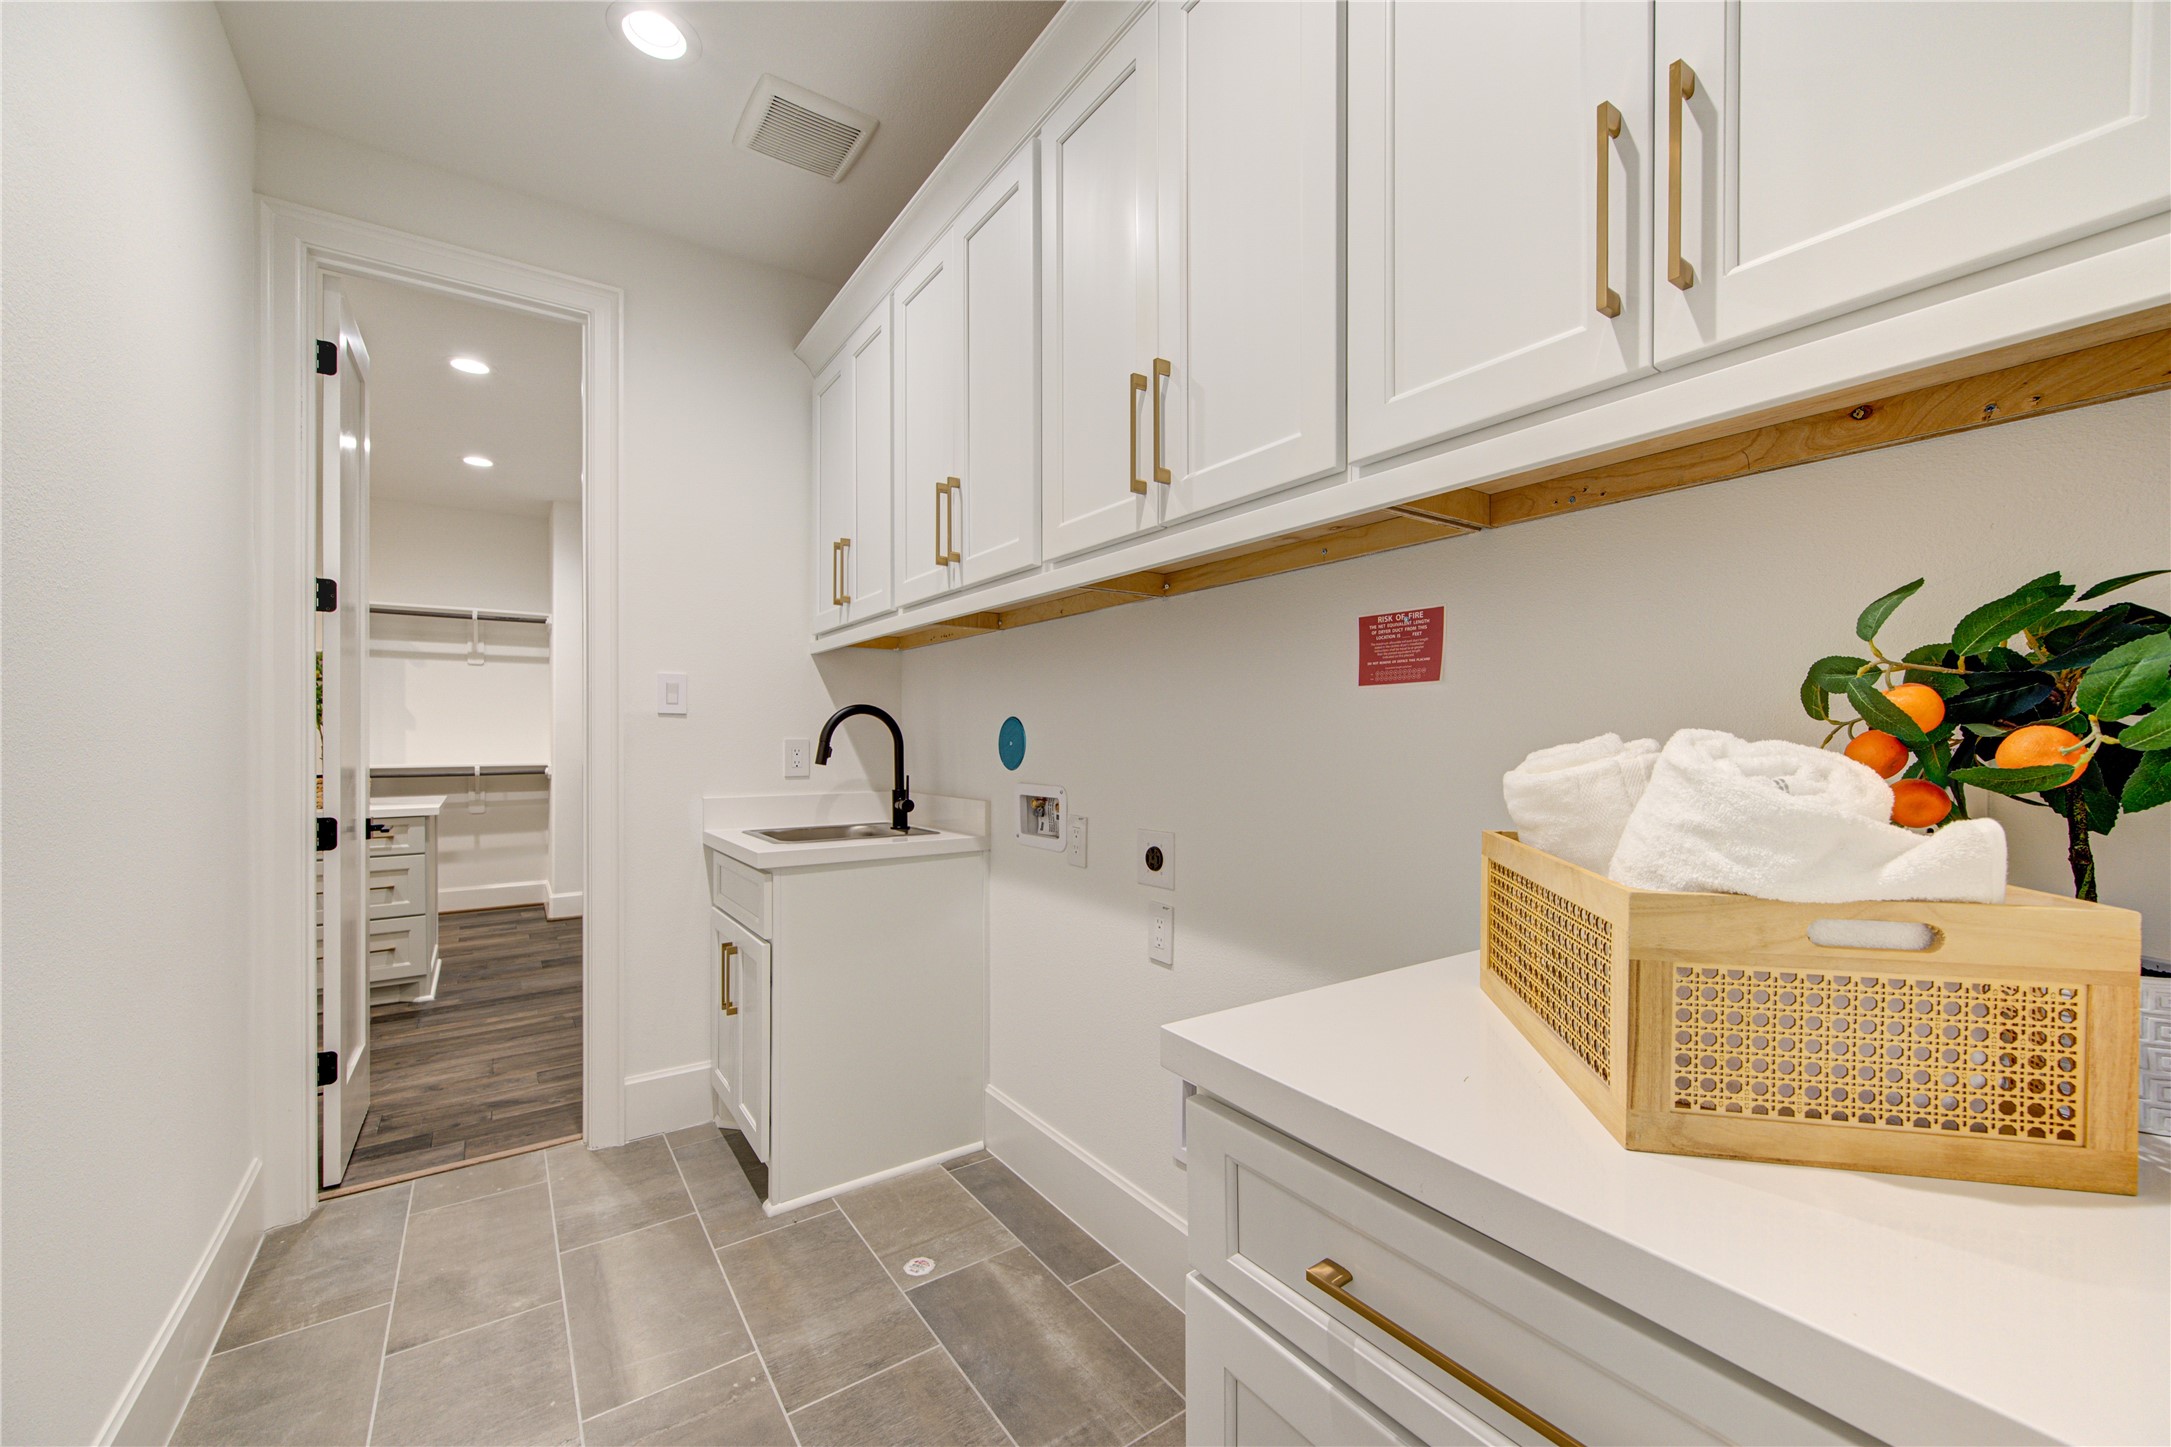 You may love doing your laundry again in this stylish laundry room on the second floor with tons of cabinets.